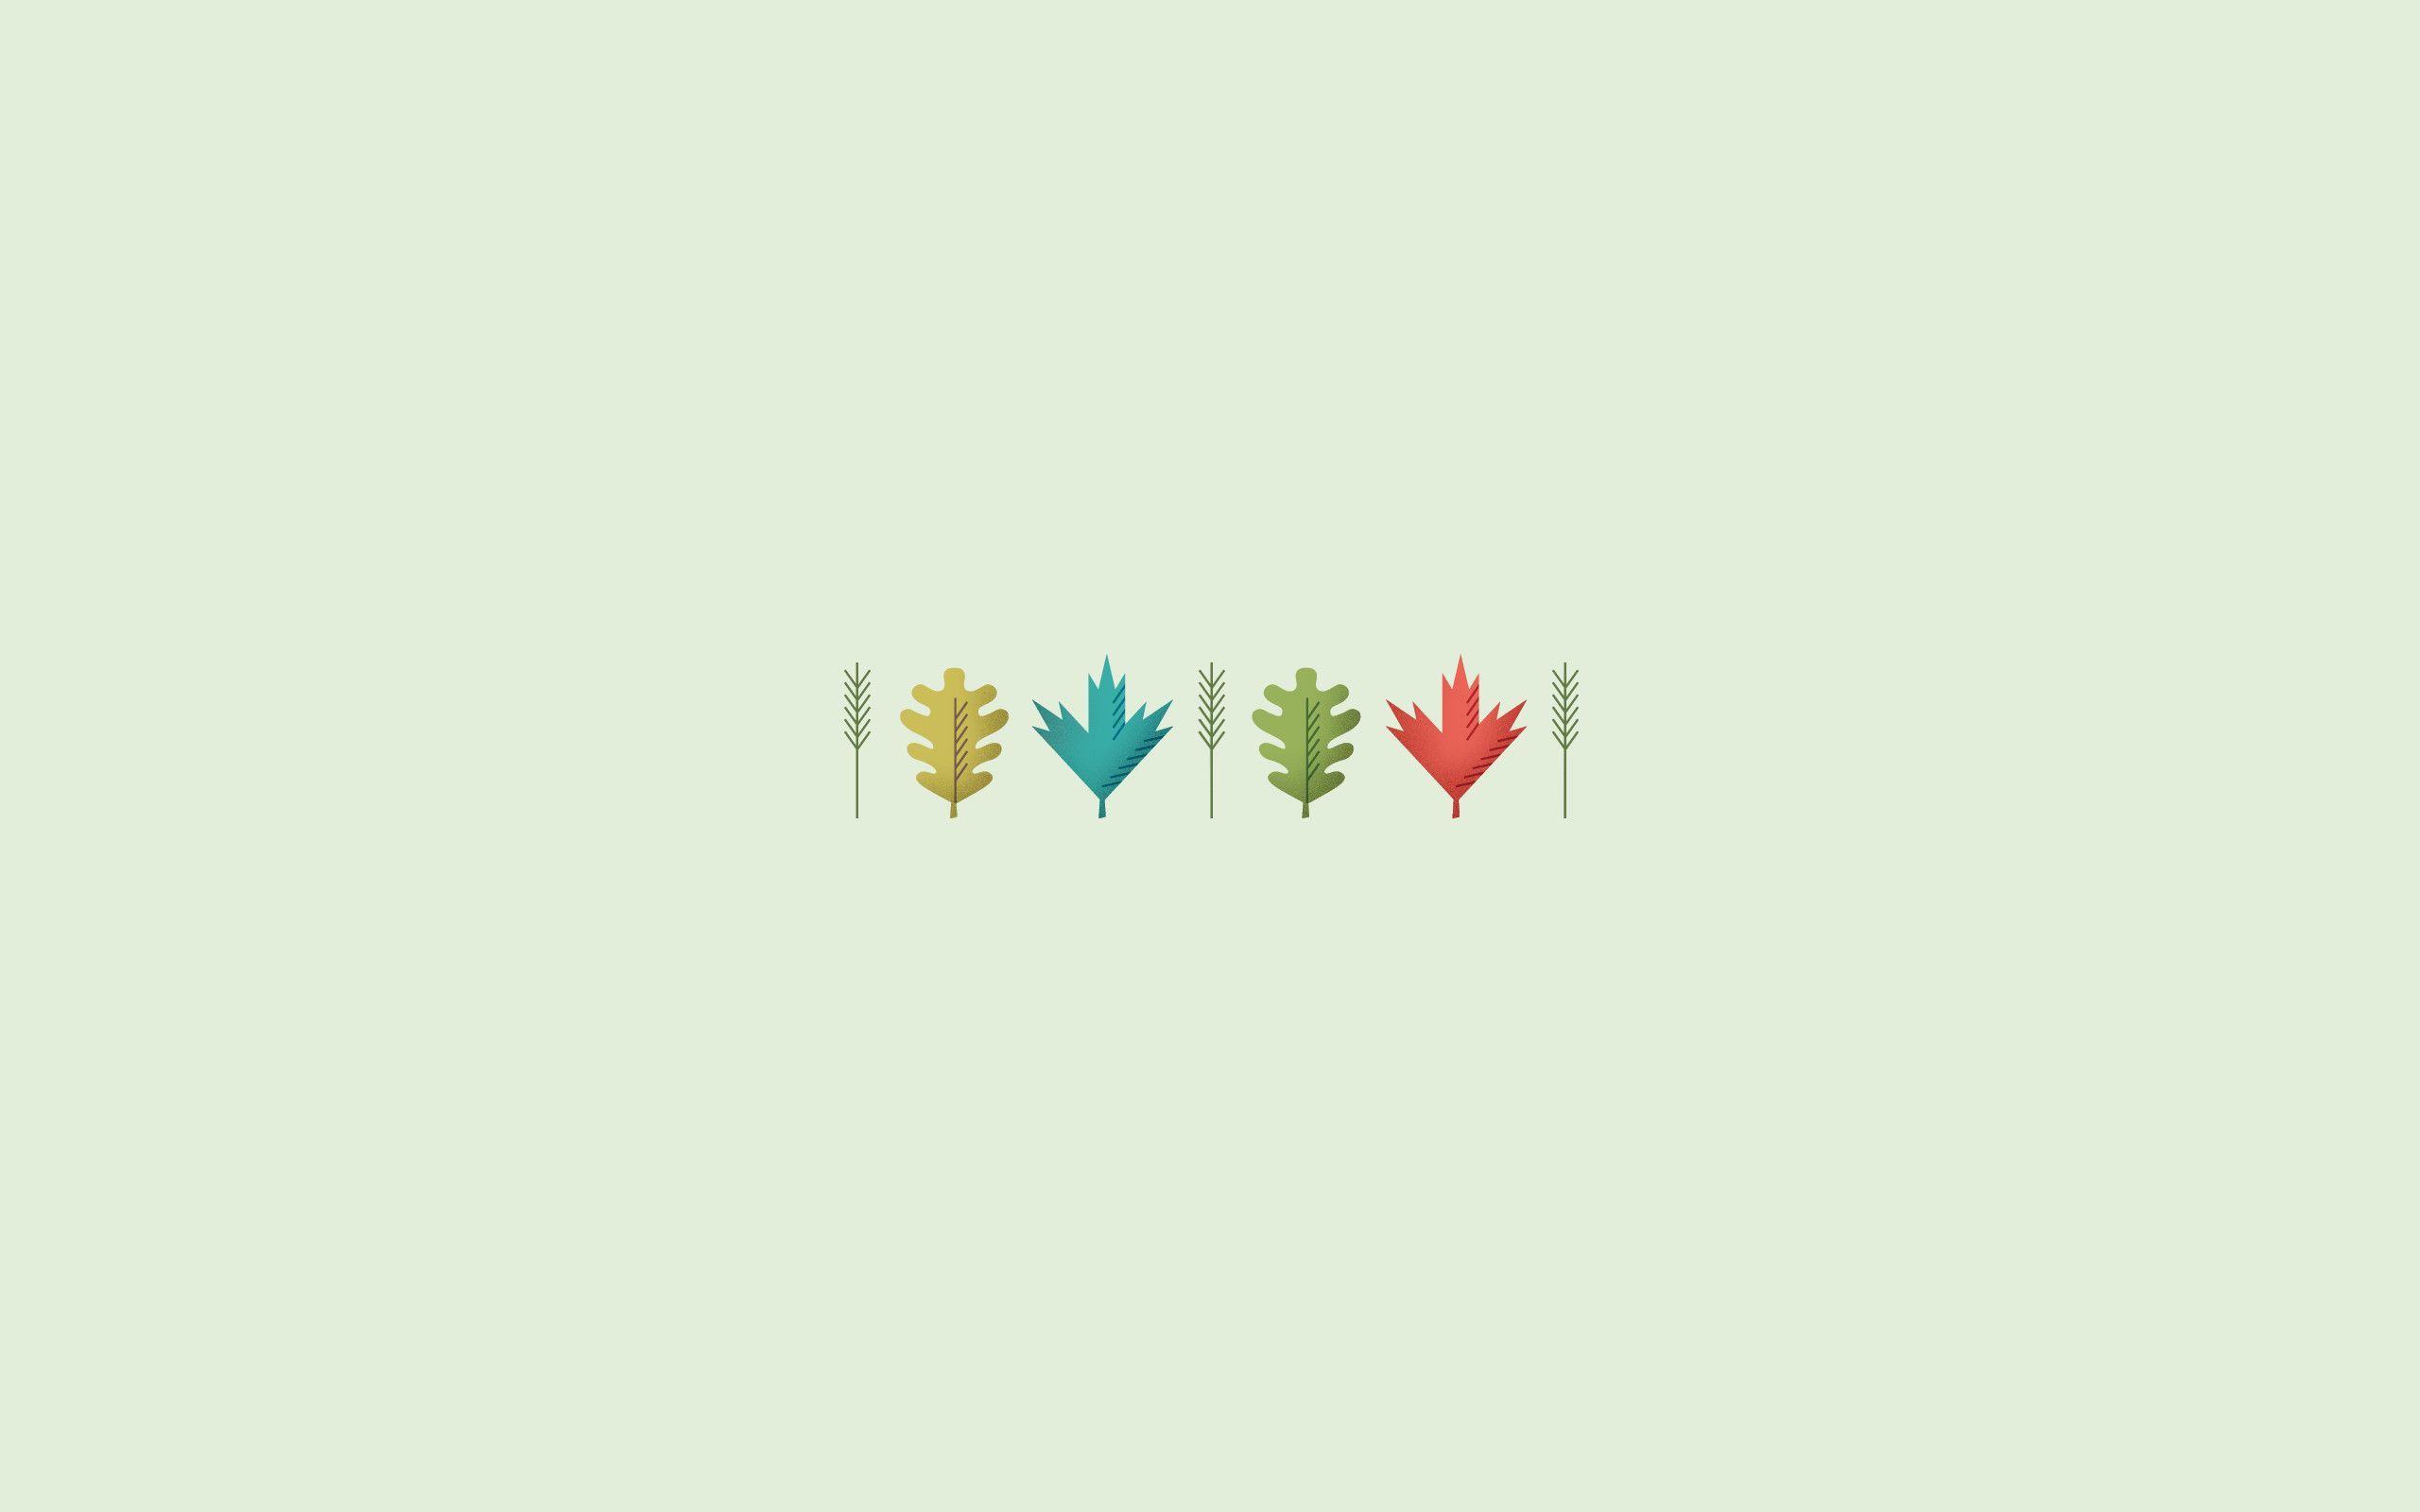 The leaves of a tree are shown in different colors - Pastel minimalist